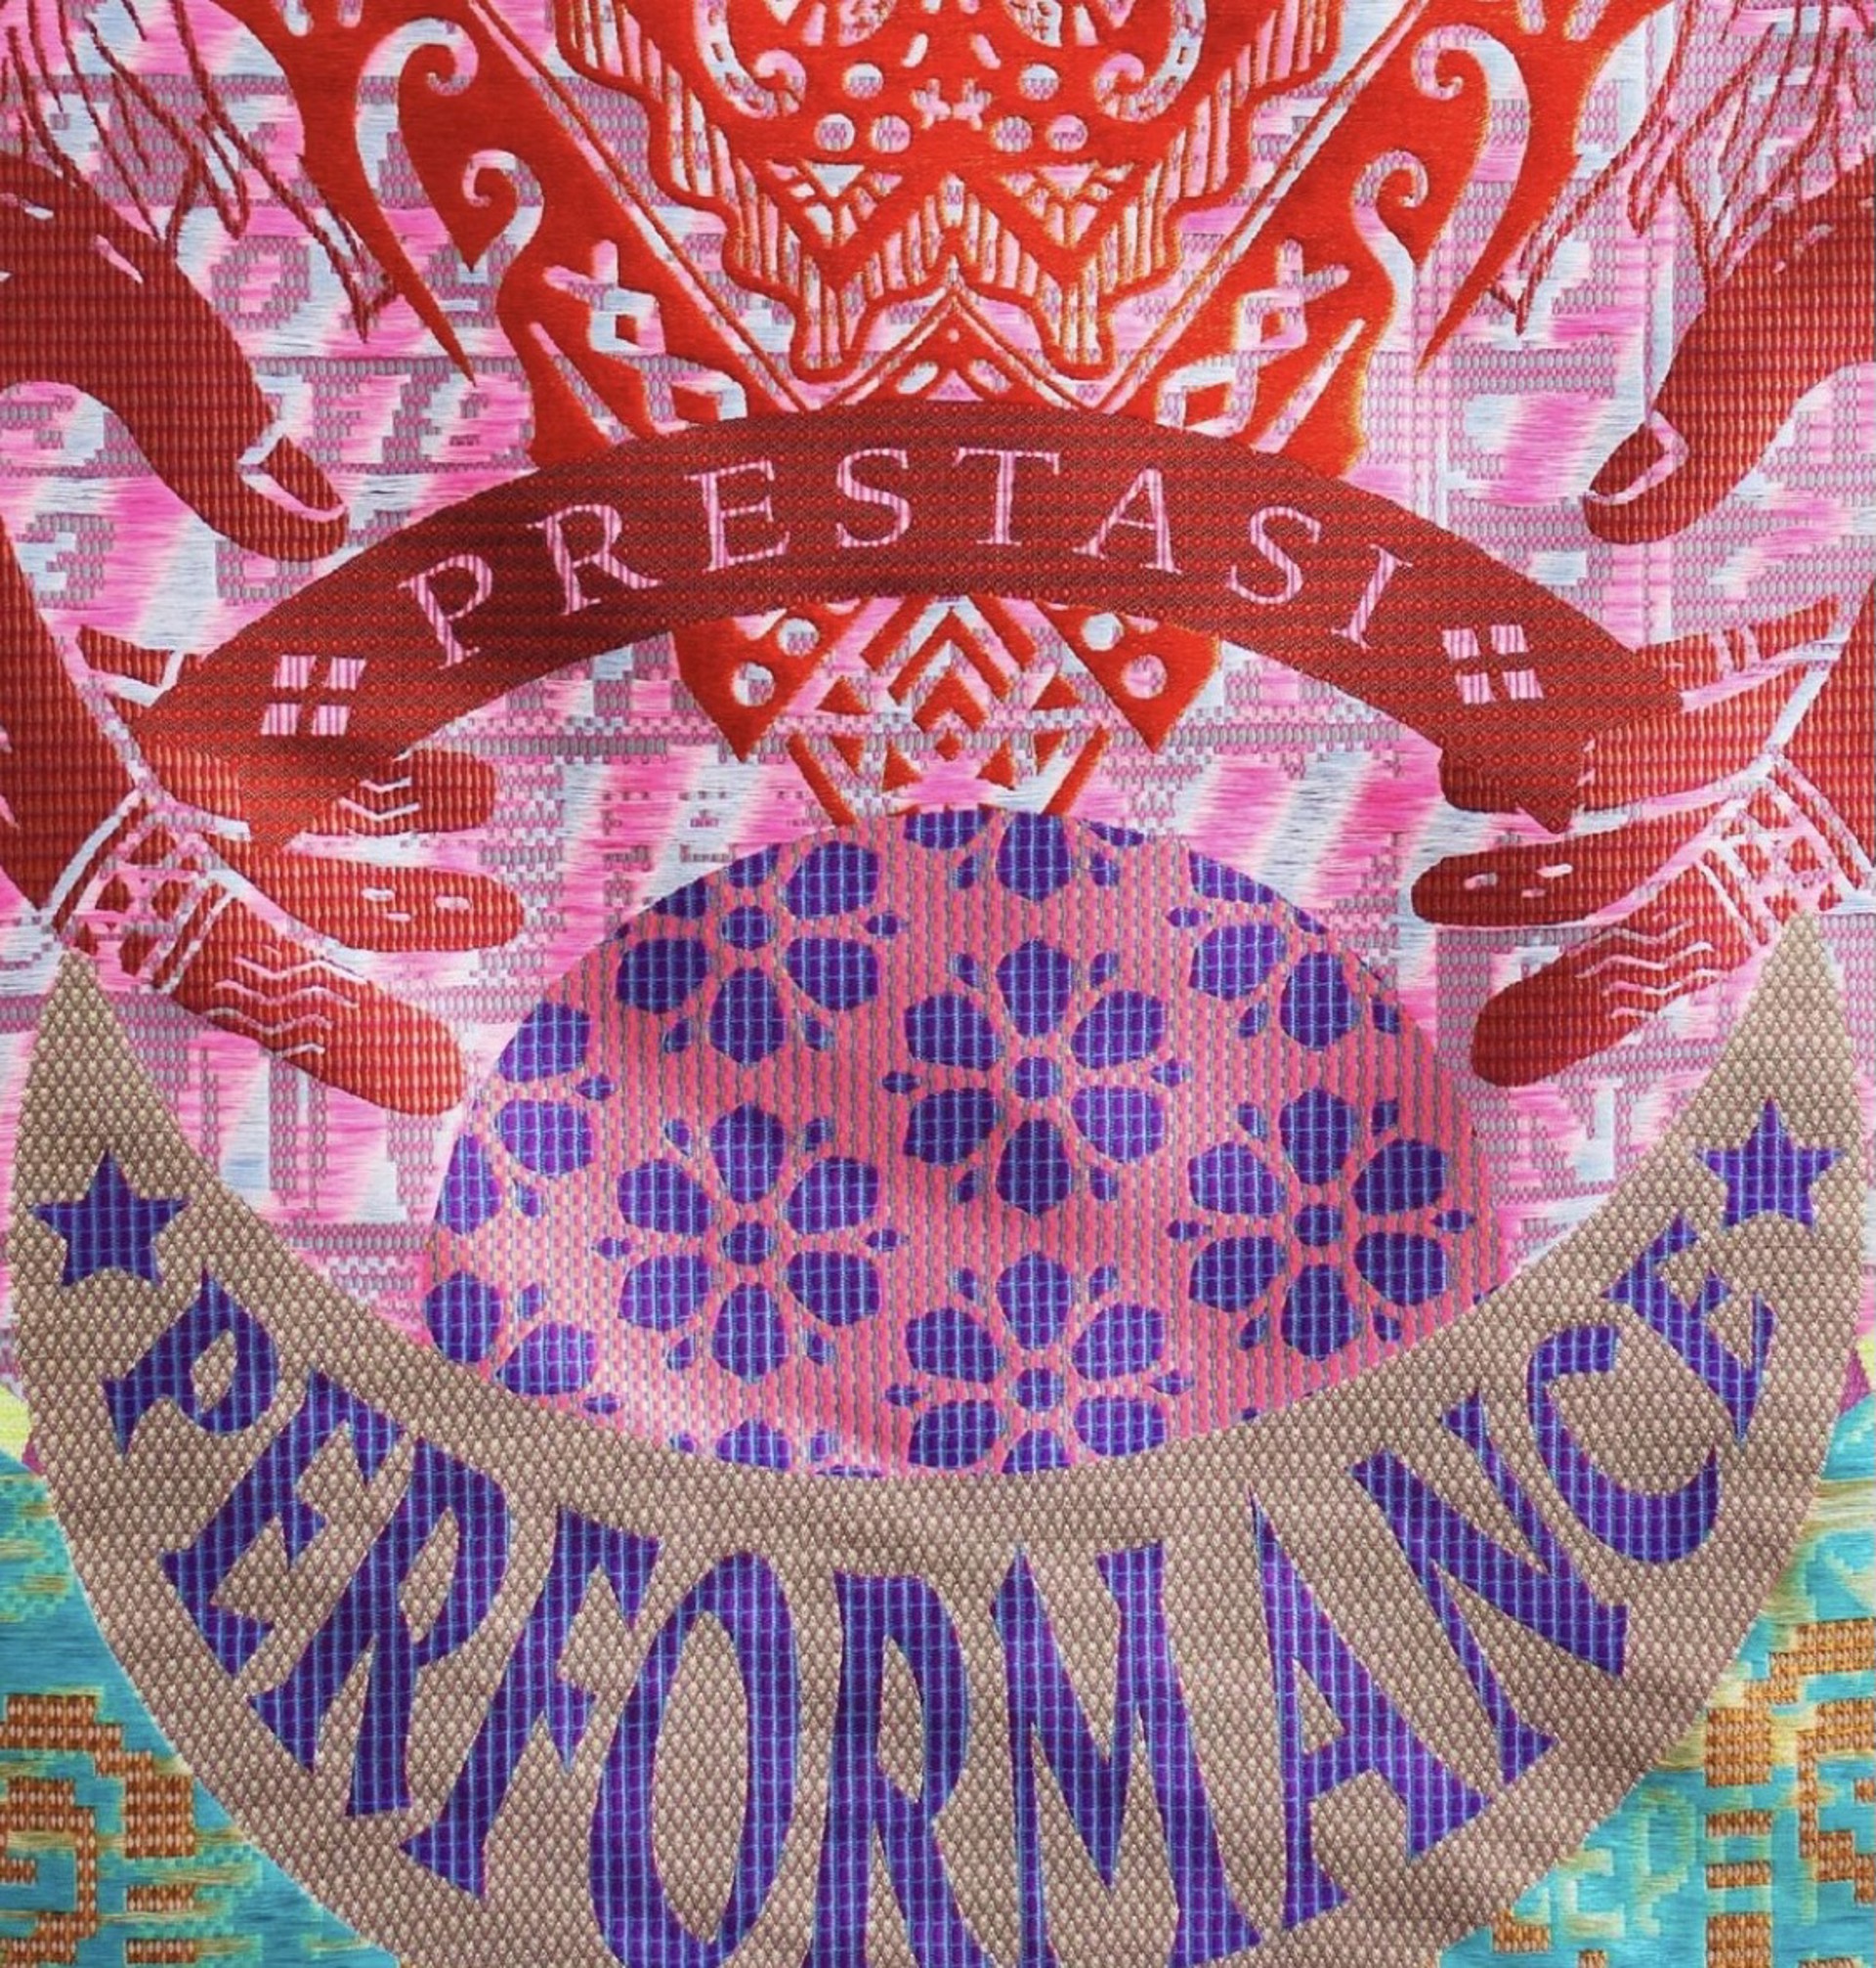 Primitive Performance (Woven Poster #08) by Marcos Kueh